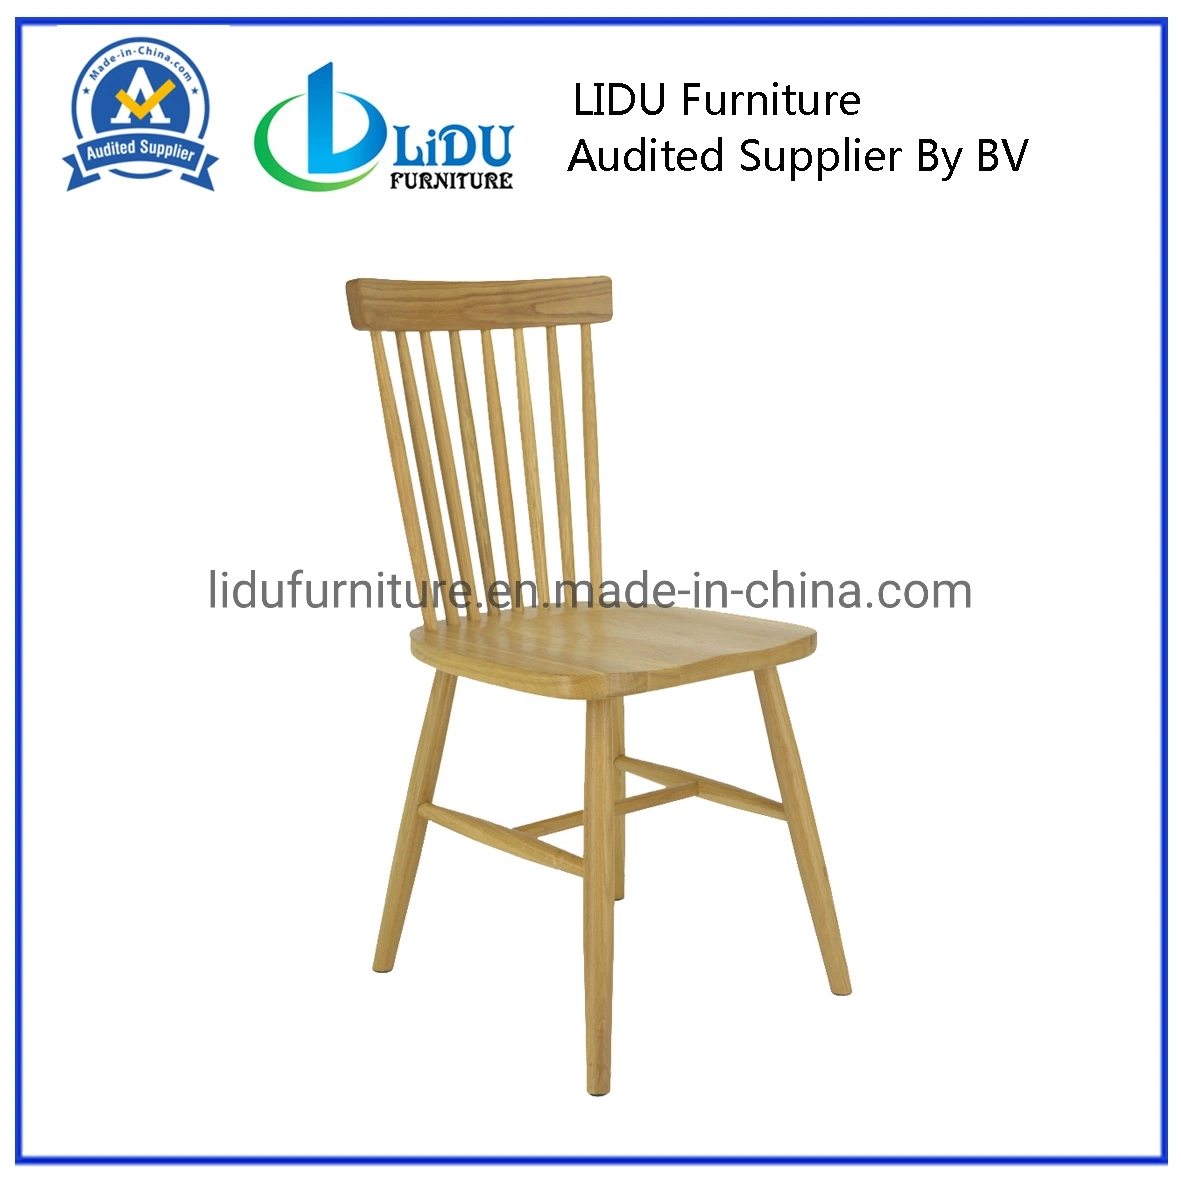 Living Room Chairs/Classic Chairs for Living Room/MID-Century Show Wood Chair Dining Table Dining Chair